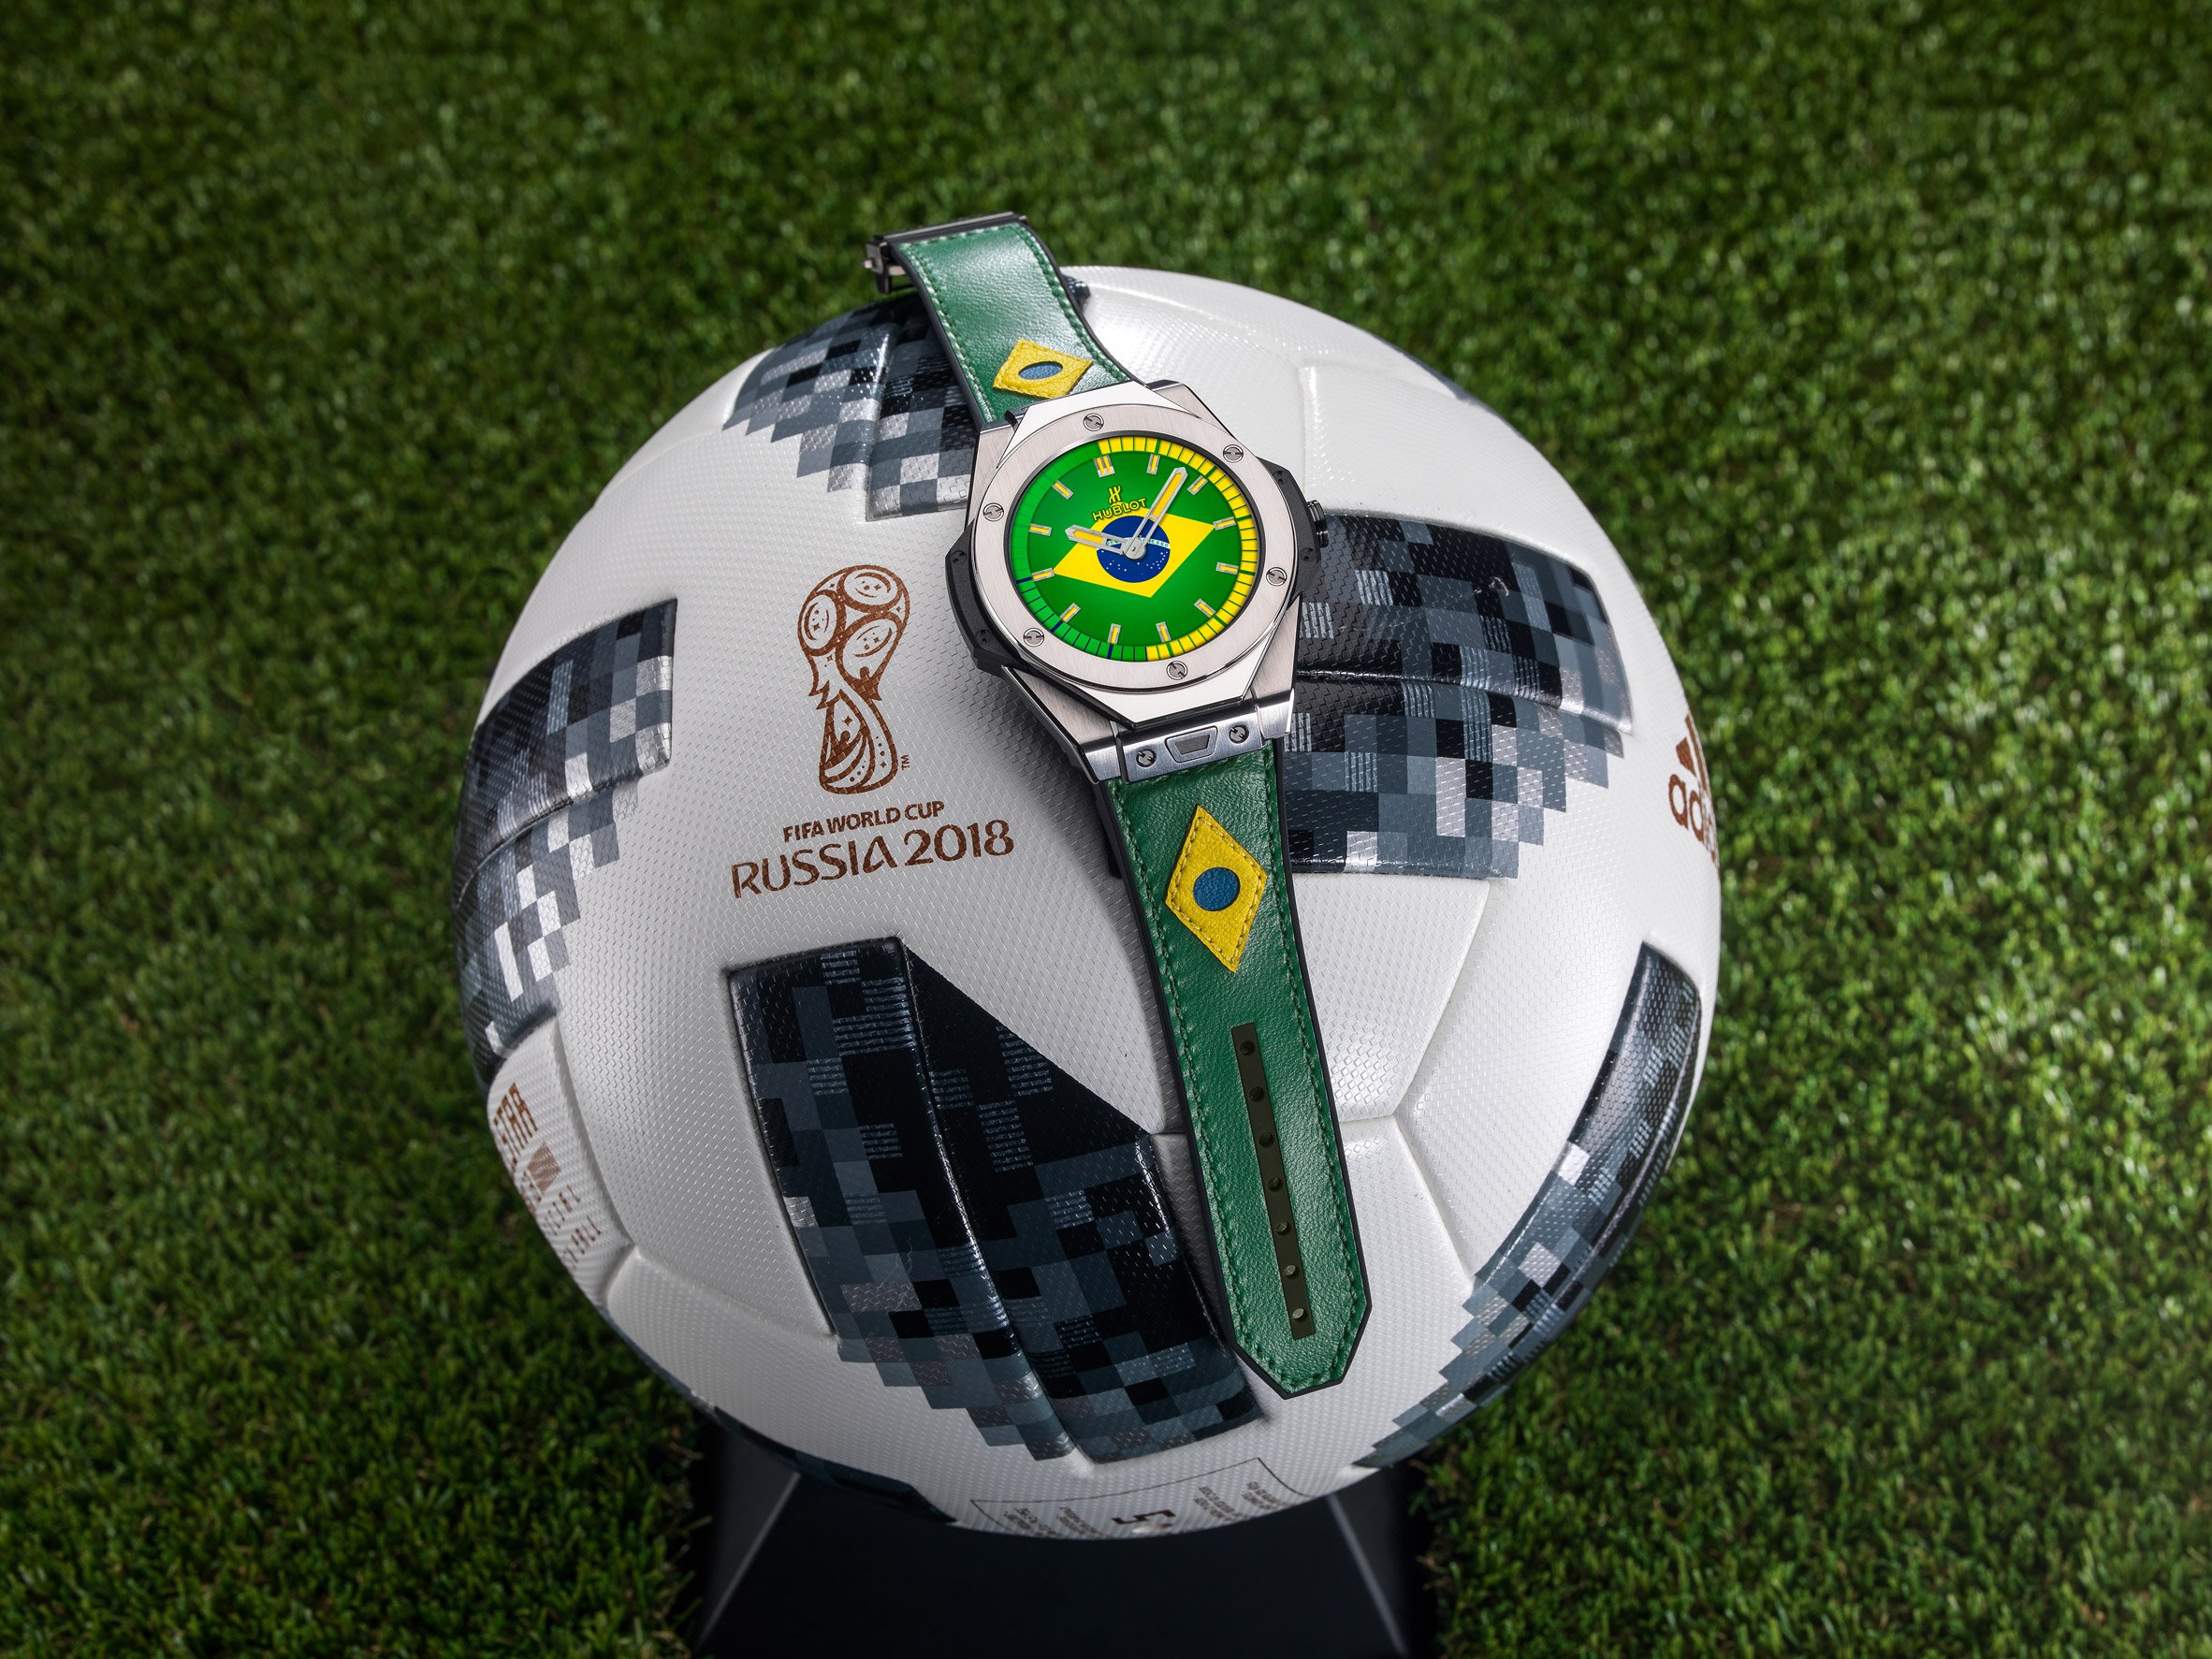 Hublot's first smartwatch to be used by referees at World Cup